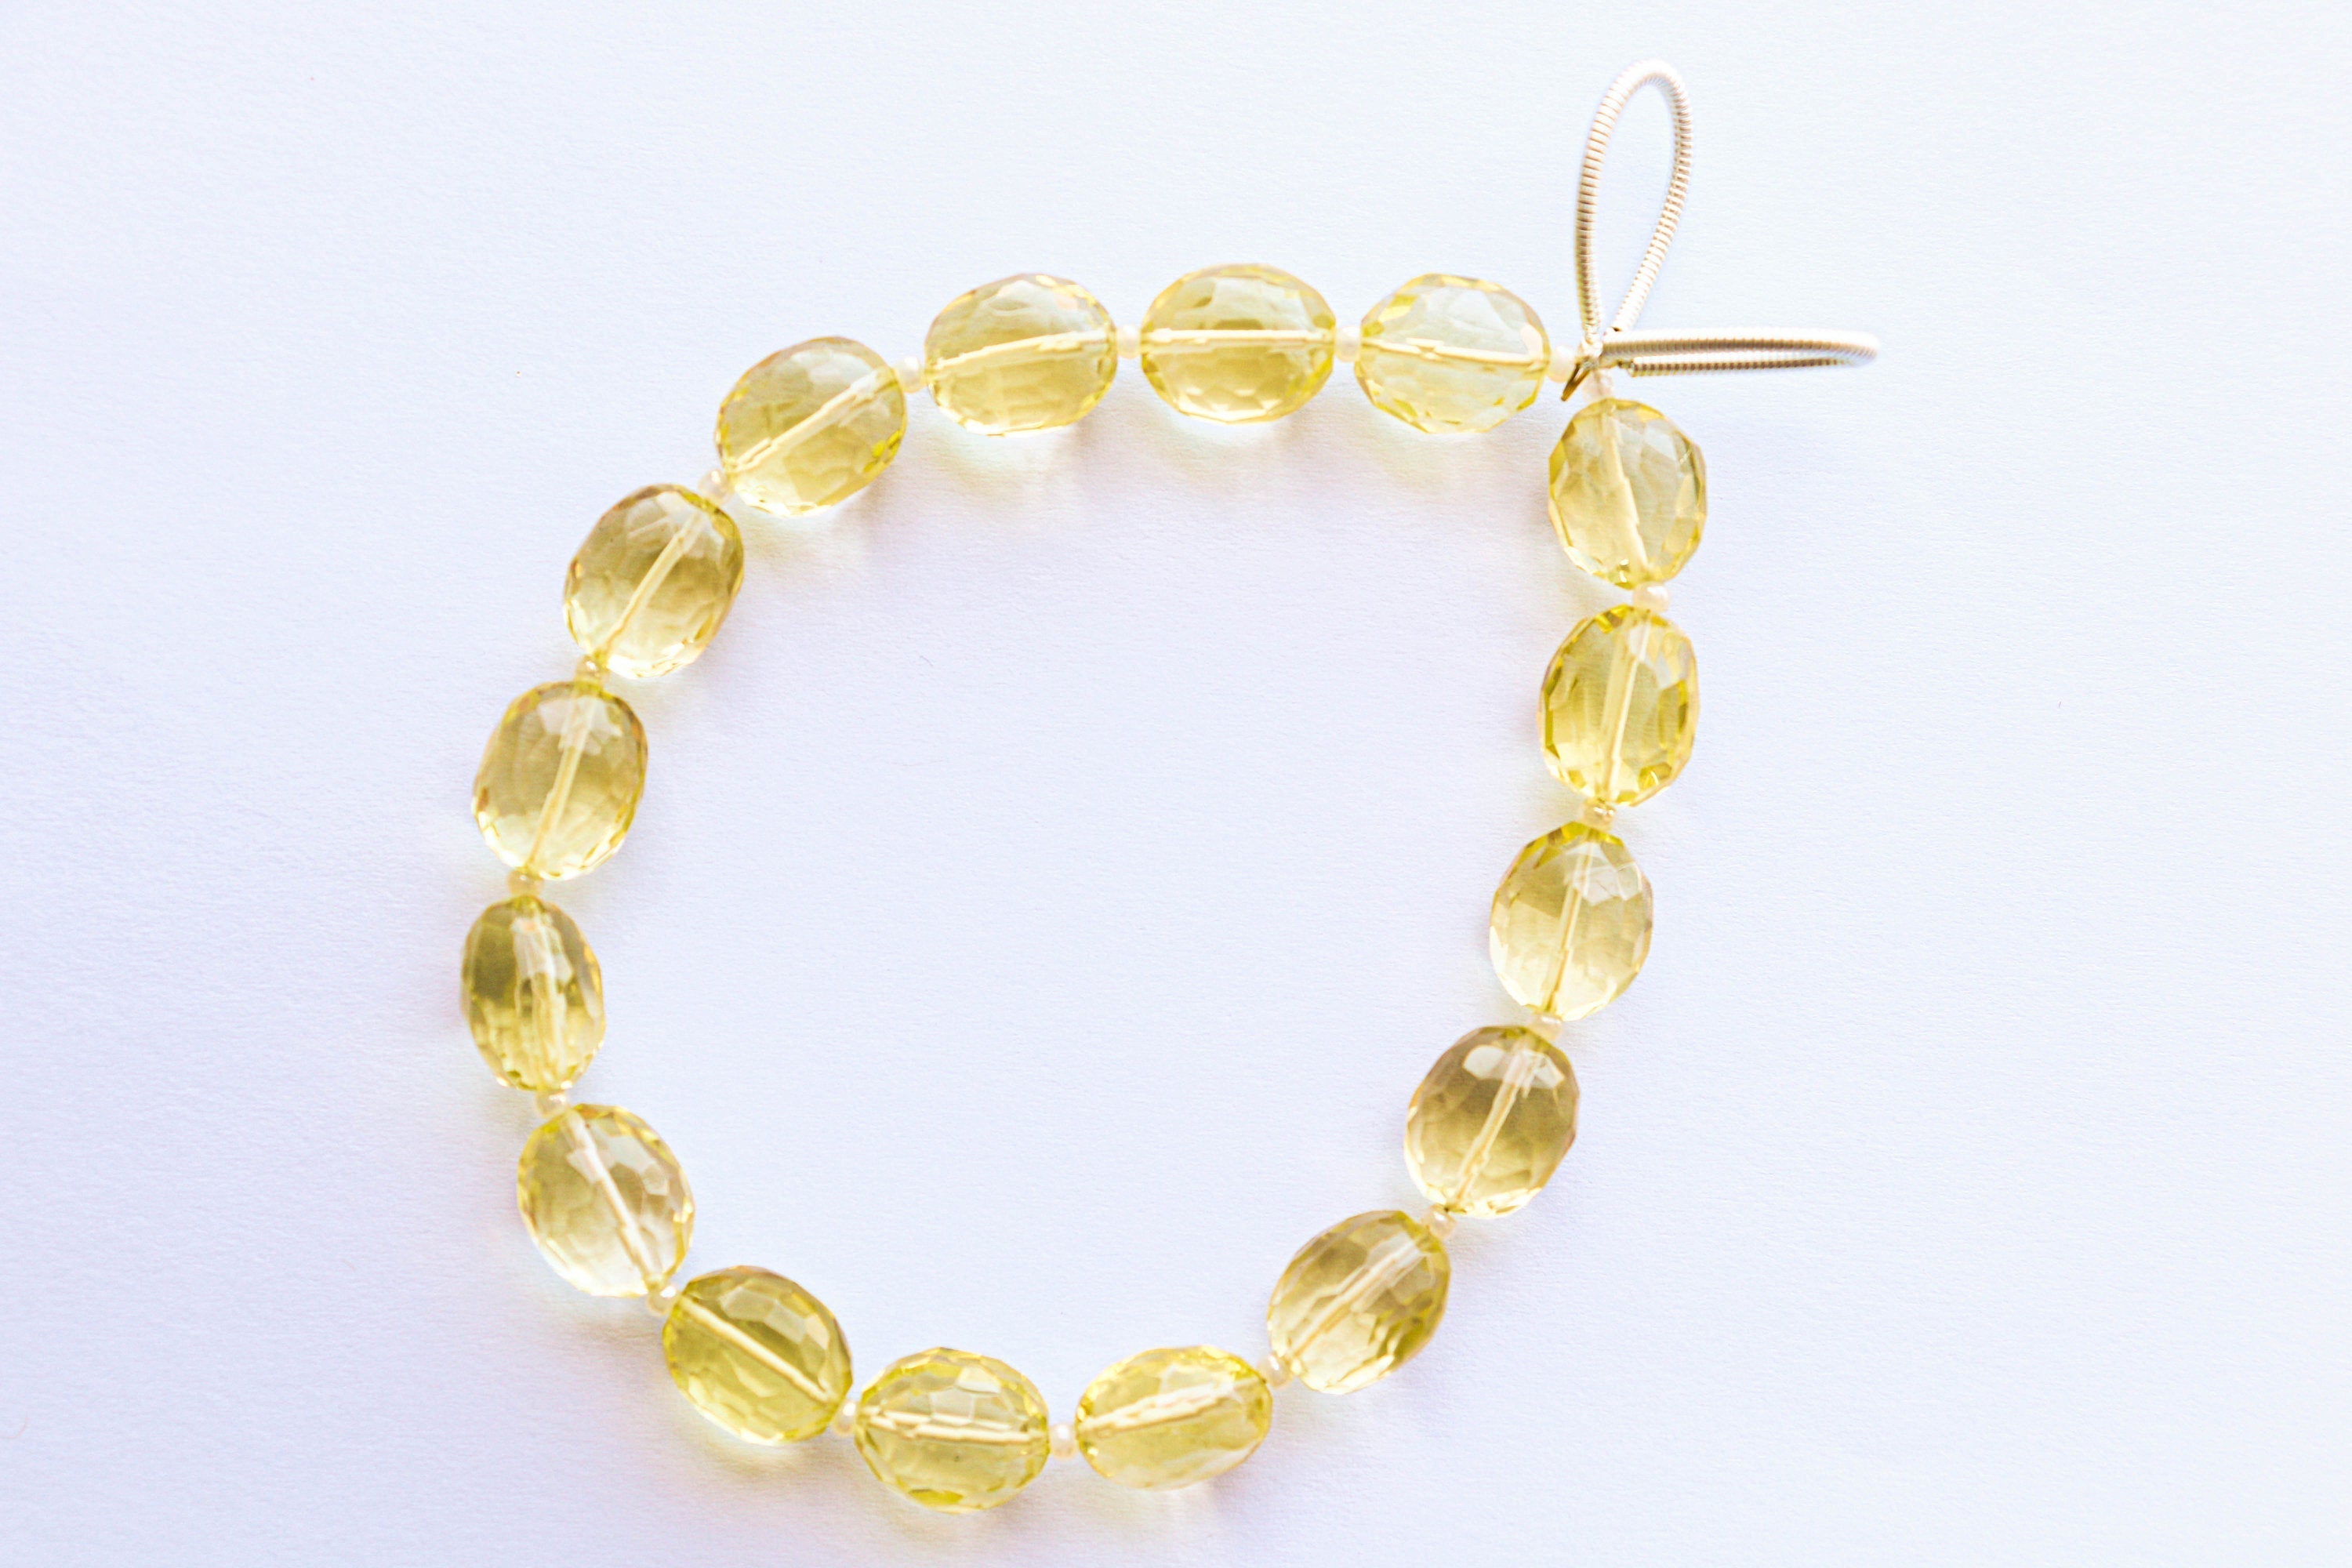 Lemon Quartz Beads Egg Shape Faceted | 9x10mm | 16 Pieces | Center drill | 8 inch Strand | Natural Gemstone Bead for jewelry making Beadsforyourjewelry